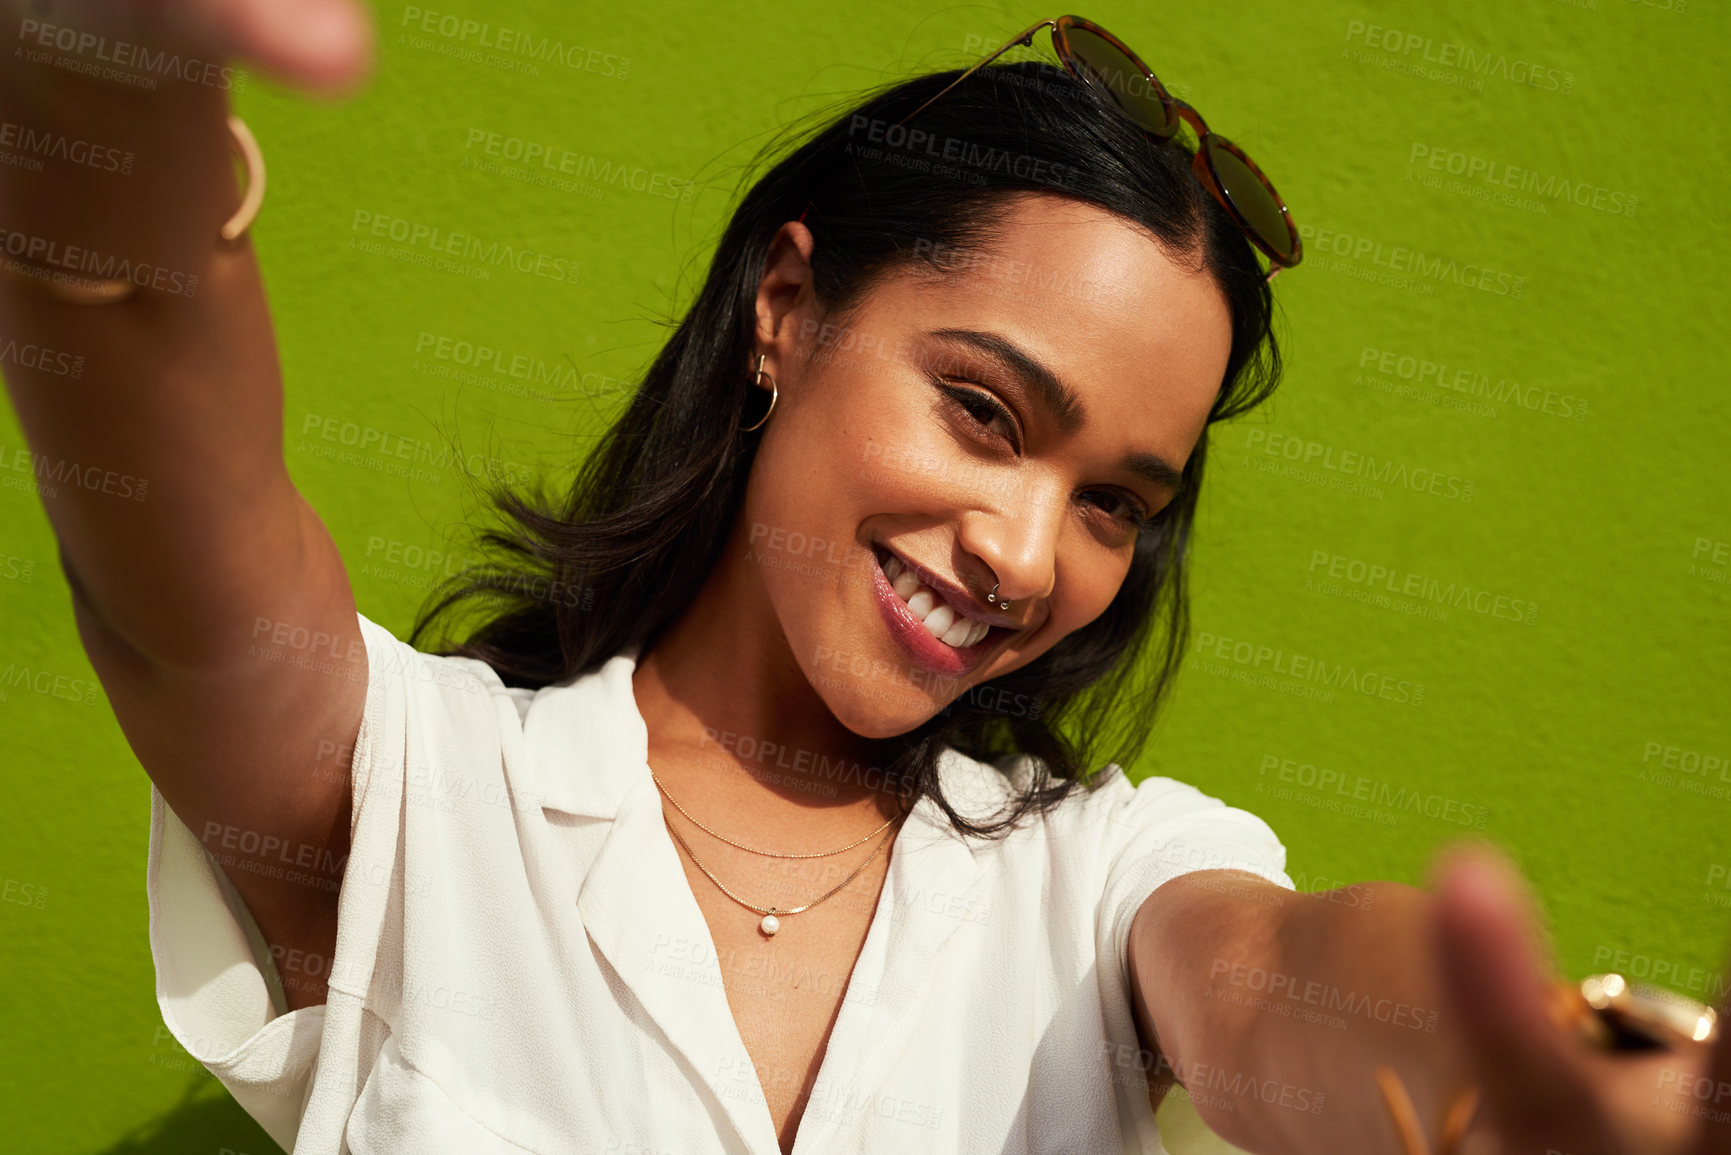 Buy stock photo Cropped portrait of an attractive young woman standing alone and taking a selfie against a green background in the city